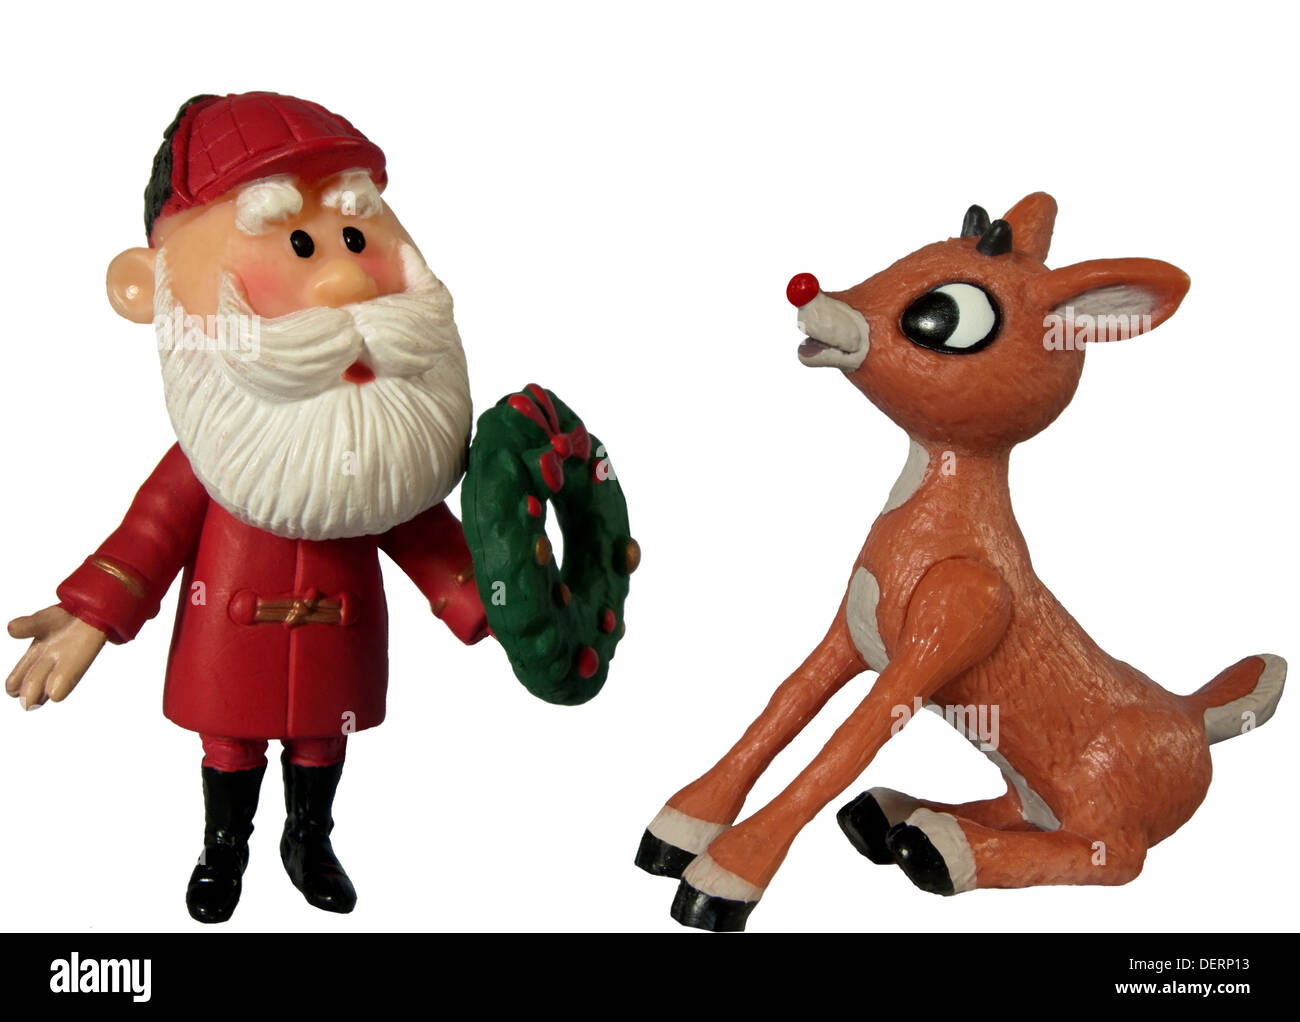 figures of the characters Santa Claus and Rudolph the red nosed reindeer on white background Stock Photo